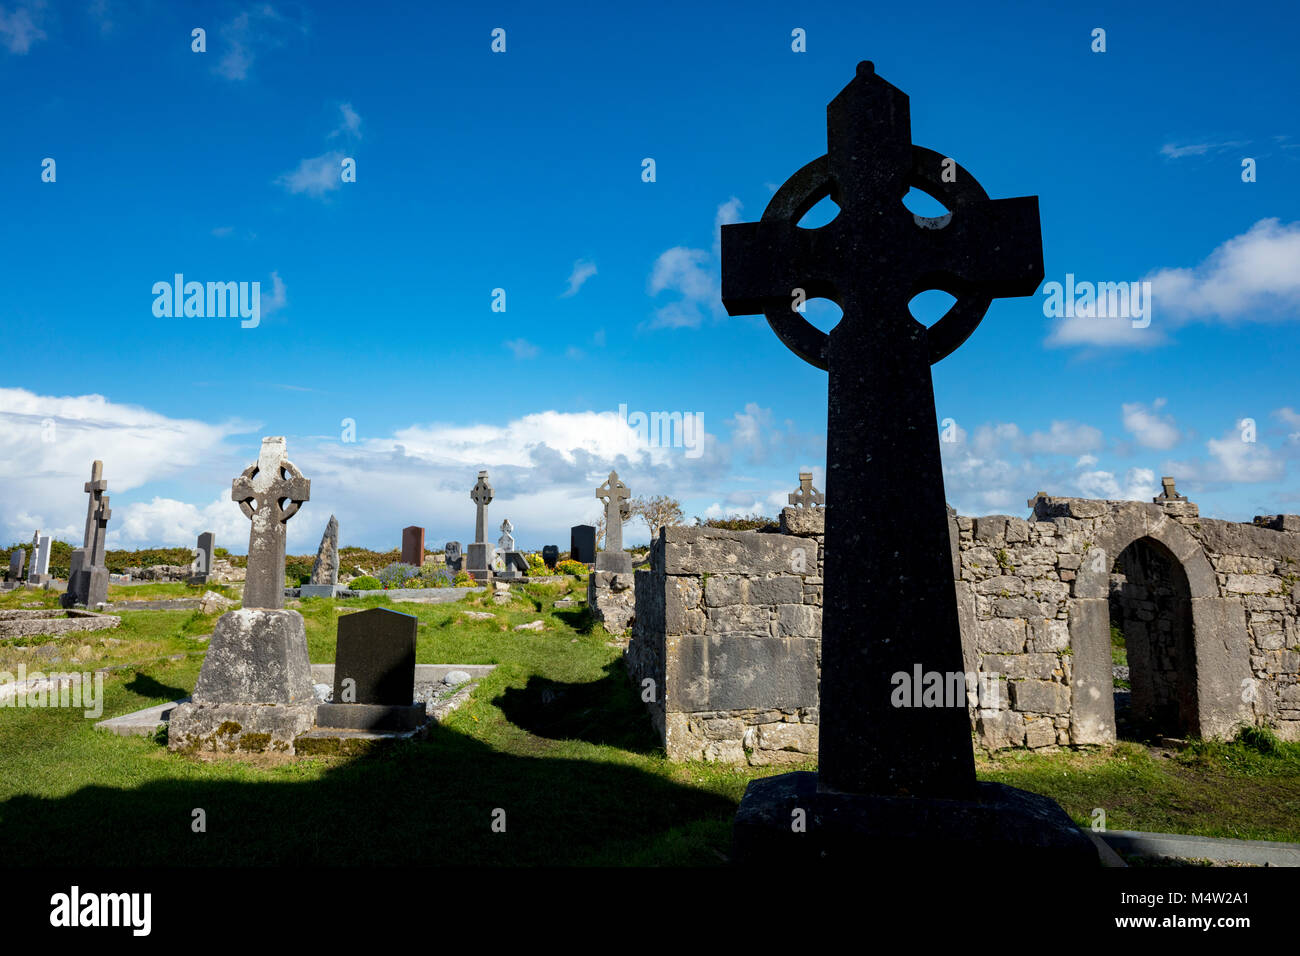 Celtic crosses in the cemetery of The Seven Churches, Inishmore, Aran Islands, County Galway, Ireland. Stock Photo